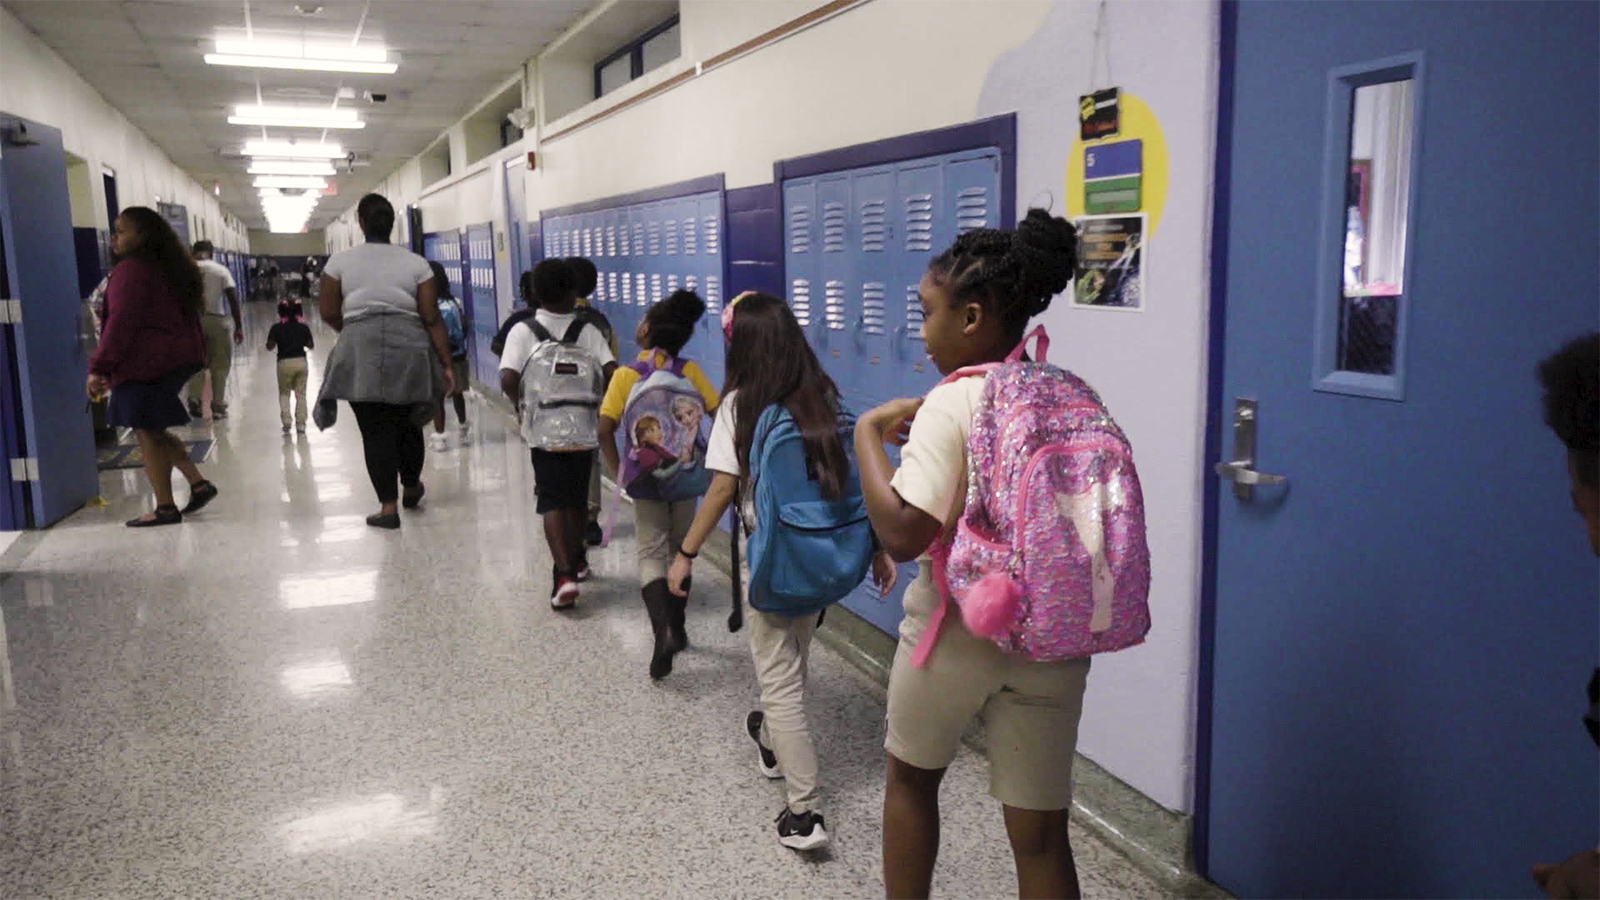 Four children, seen from the back, walk in a line inside a school hallway, next to a set of lockers.